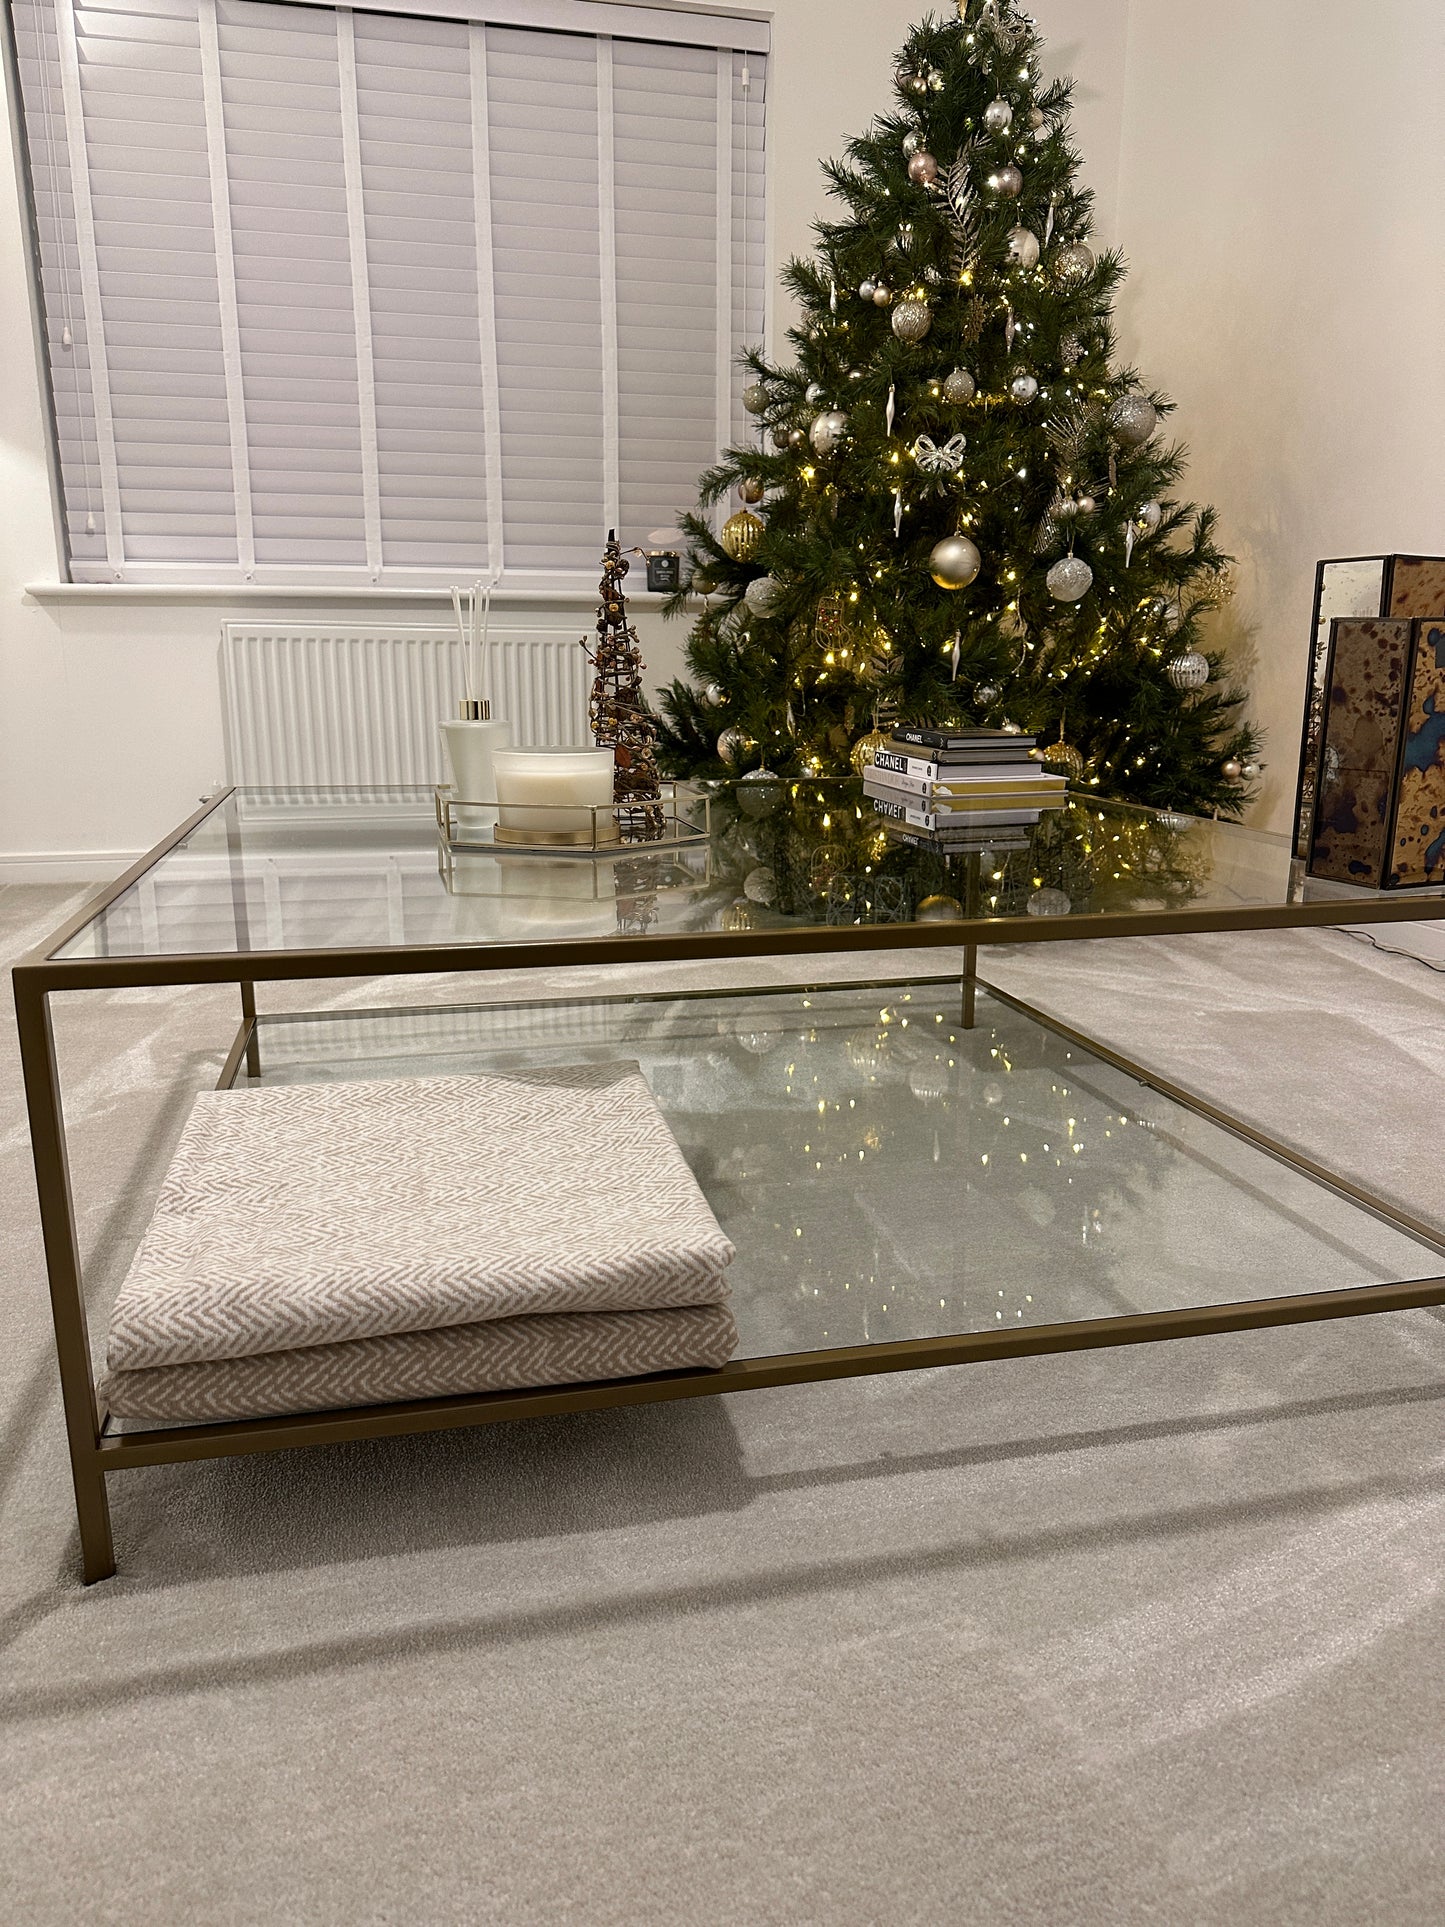 Large Square Glass Coffee Table